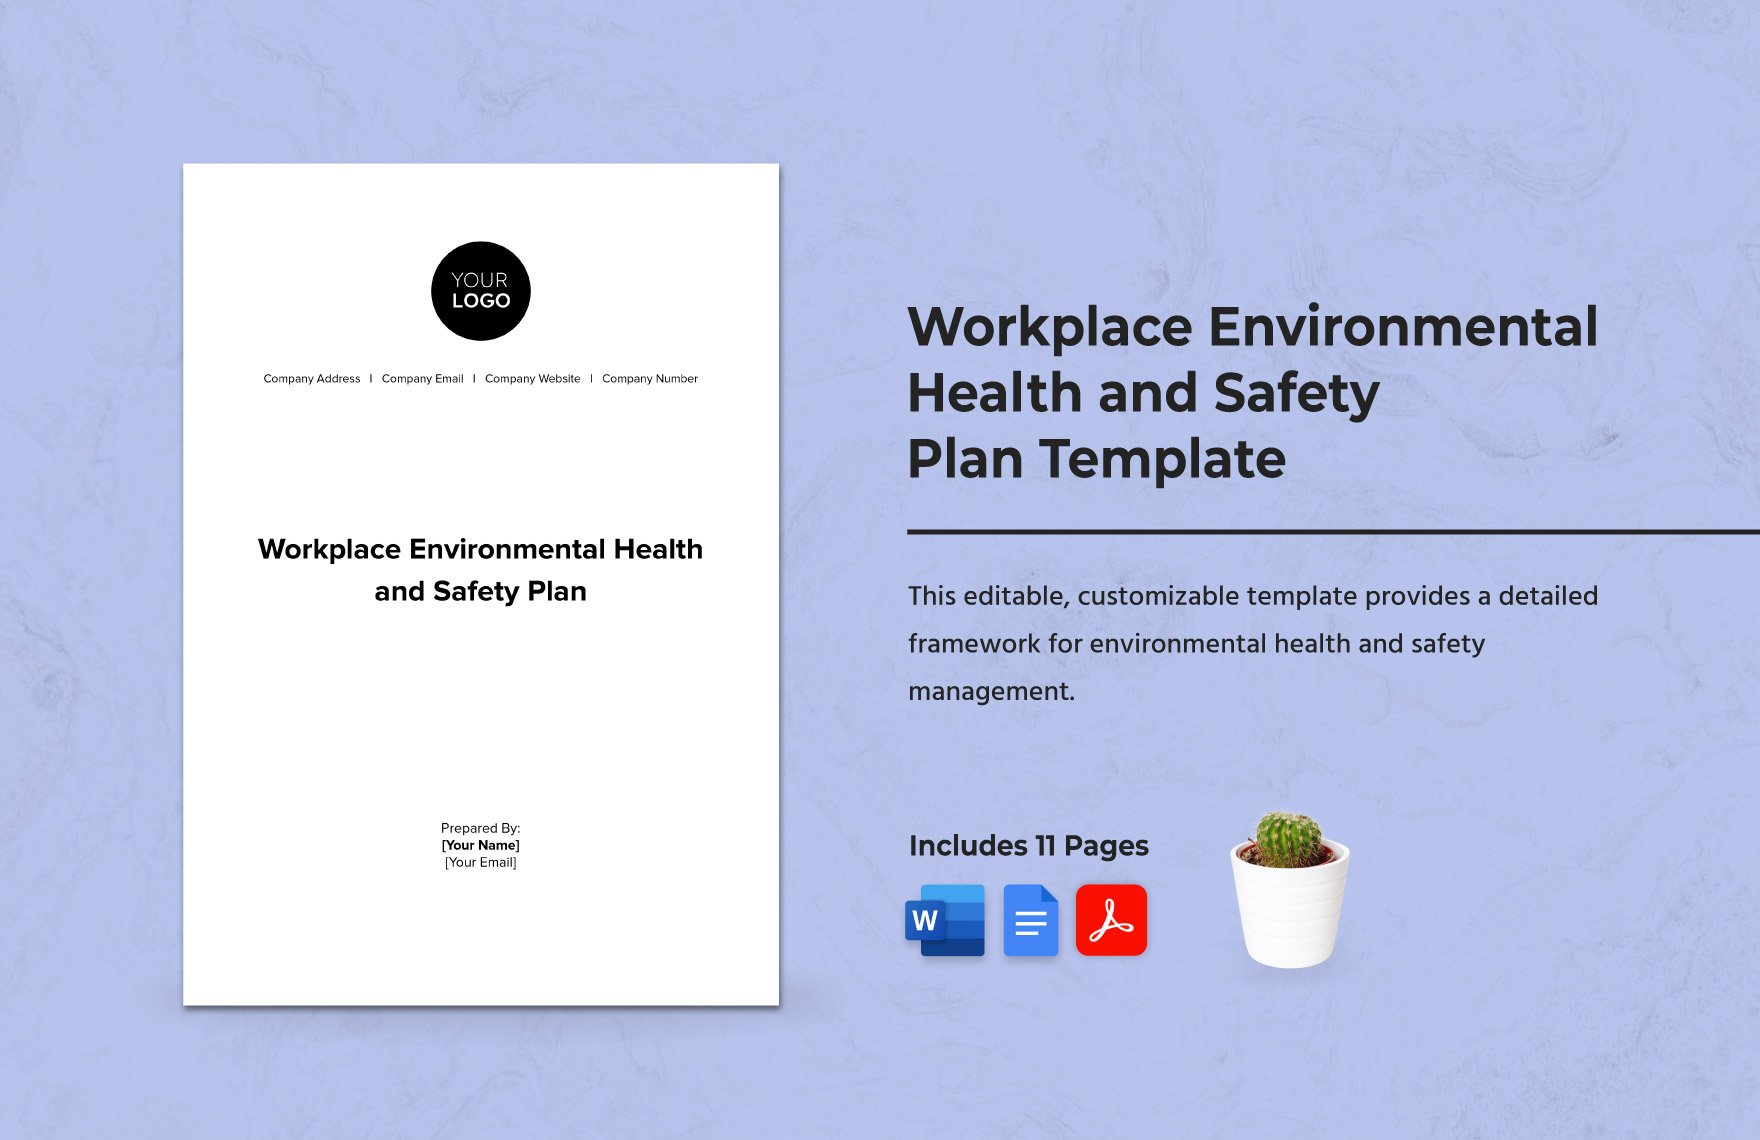 Workplace Environmental Health and Safety Plan Template in Word, Google Docs, PDF